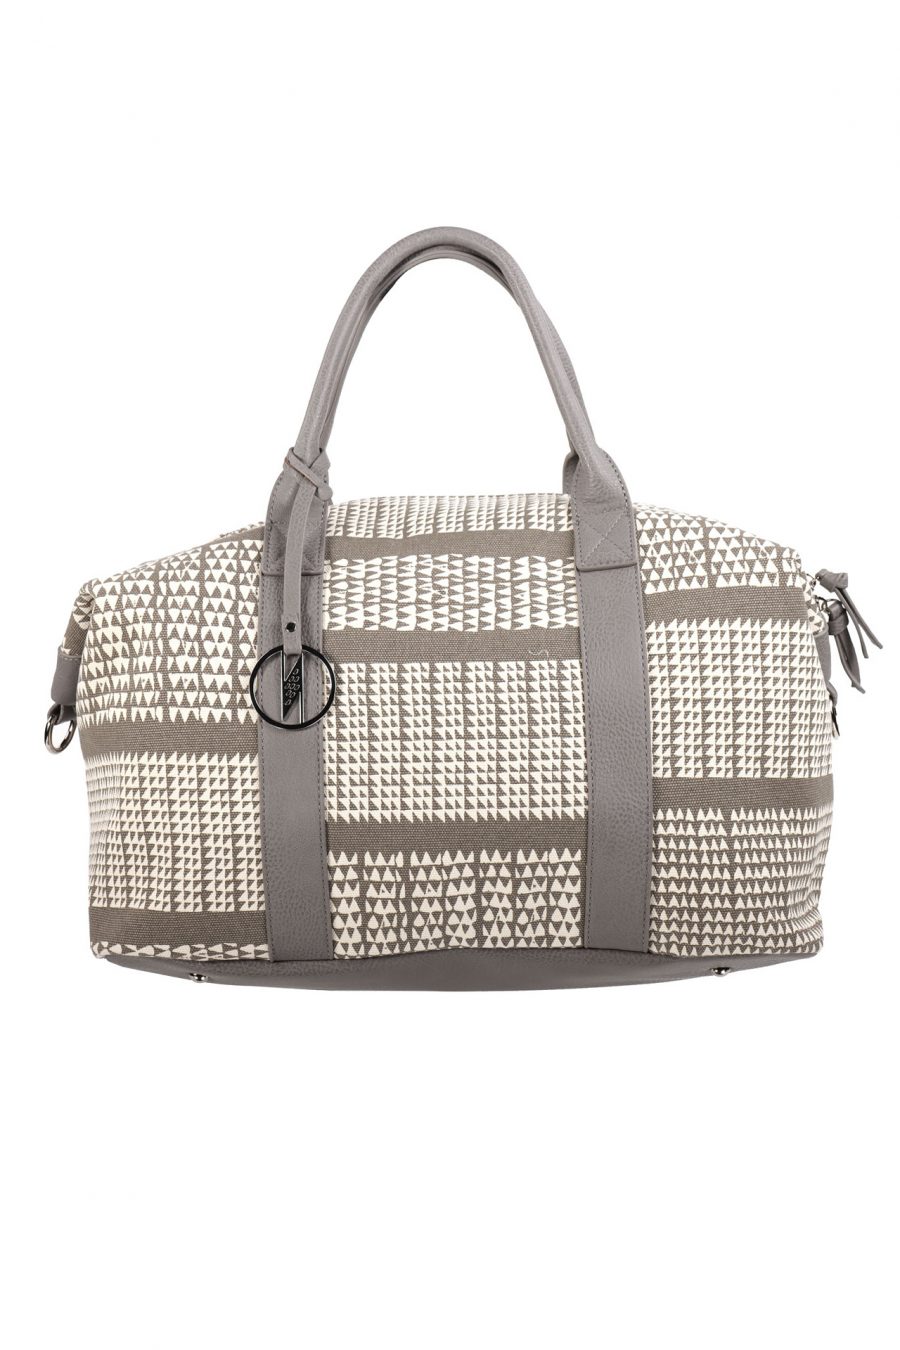 Kaapuni Mini Duffel in a Nihoku Print and Stone Color - Front View